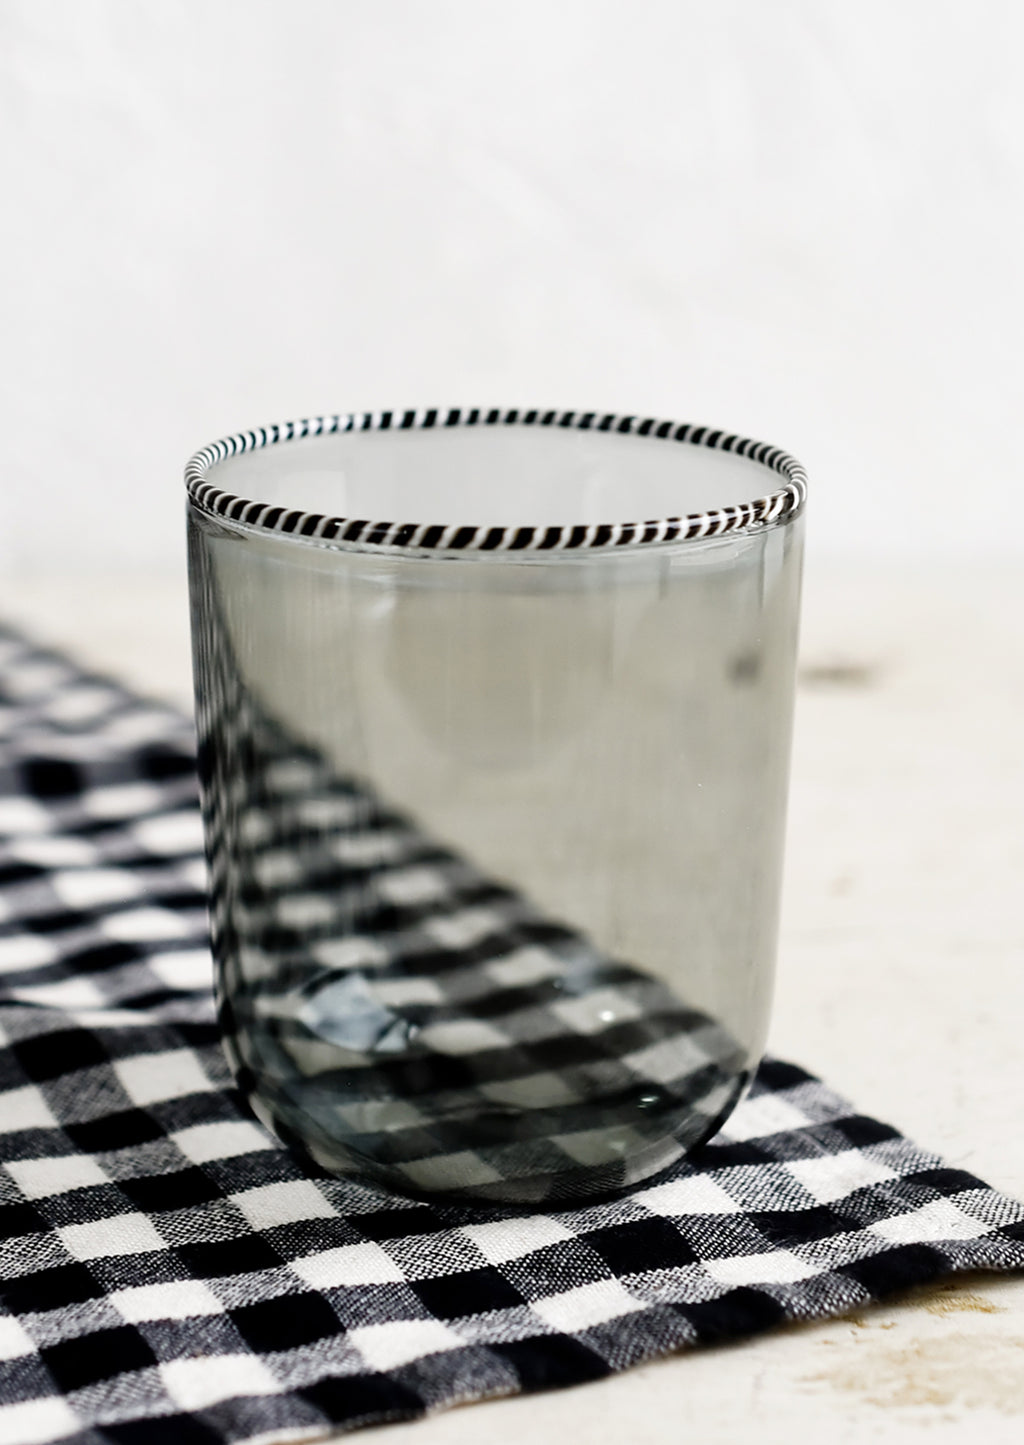 Smoke: A transparent glass tumbler in grey color with black and white striped rim.